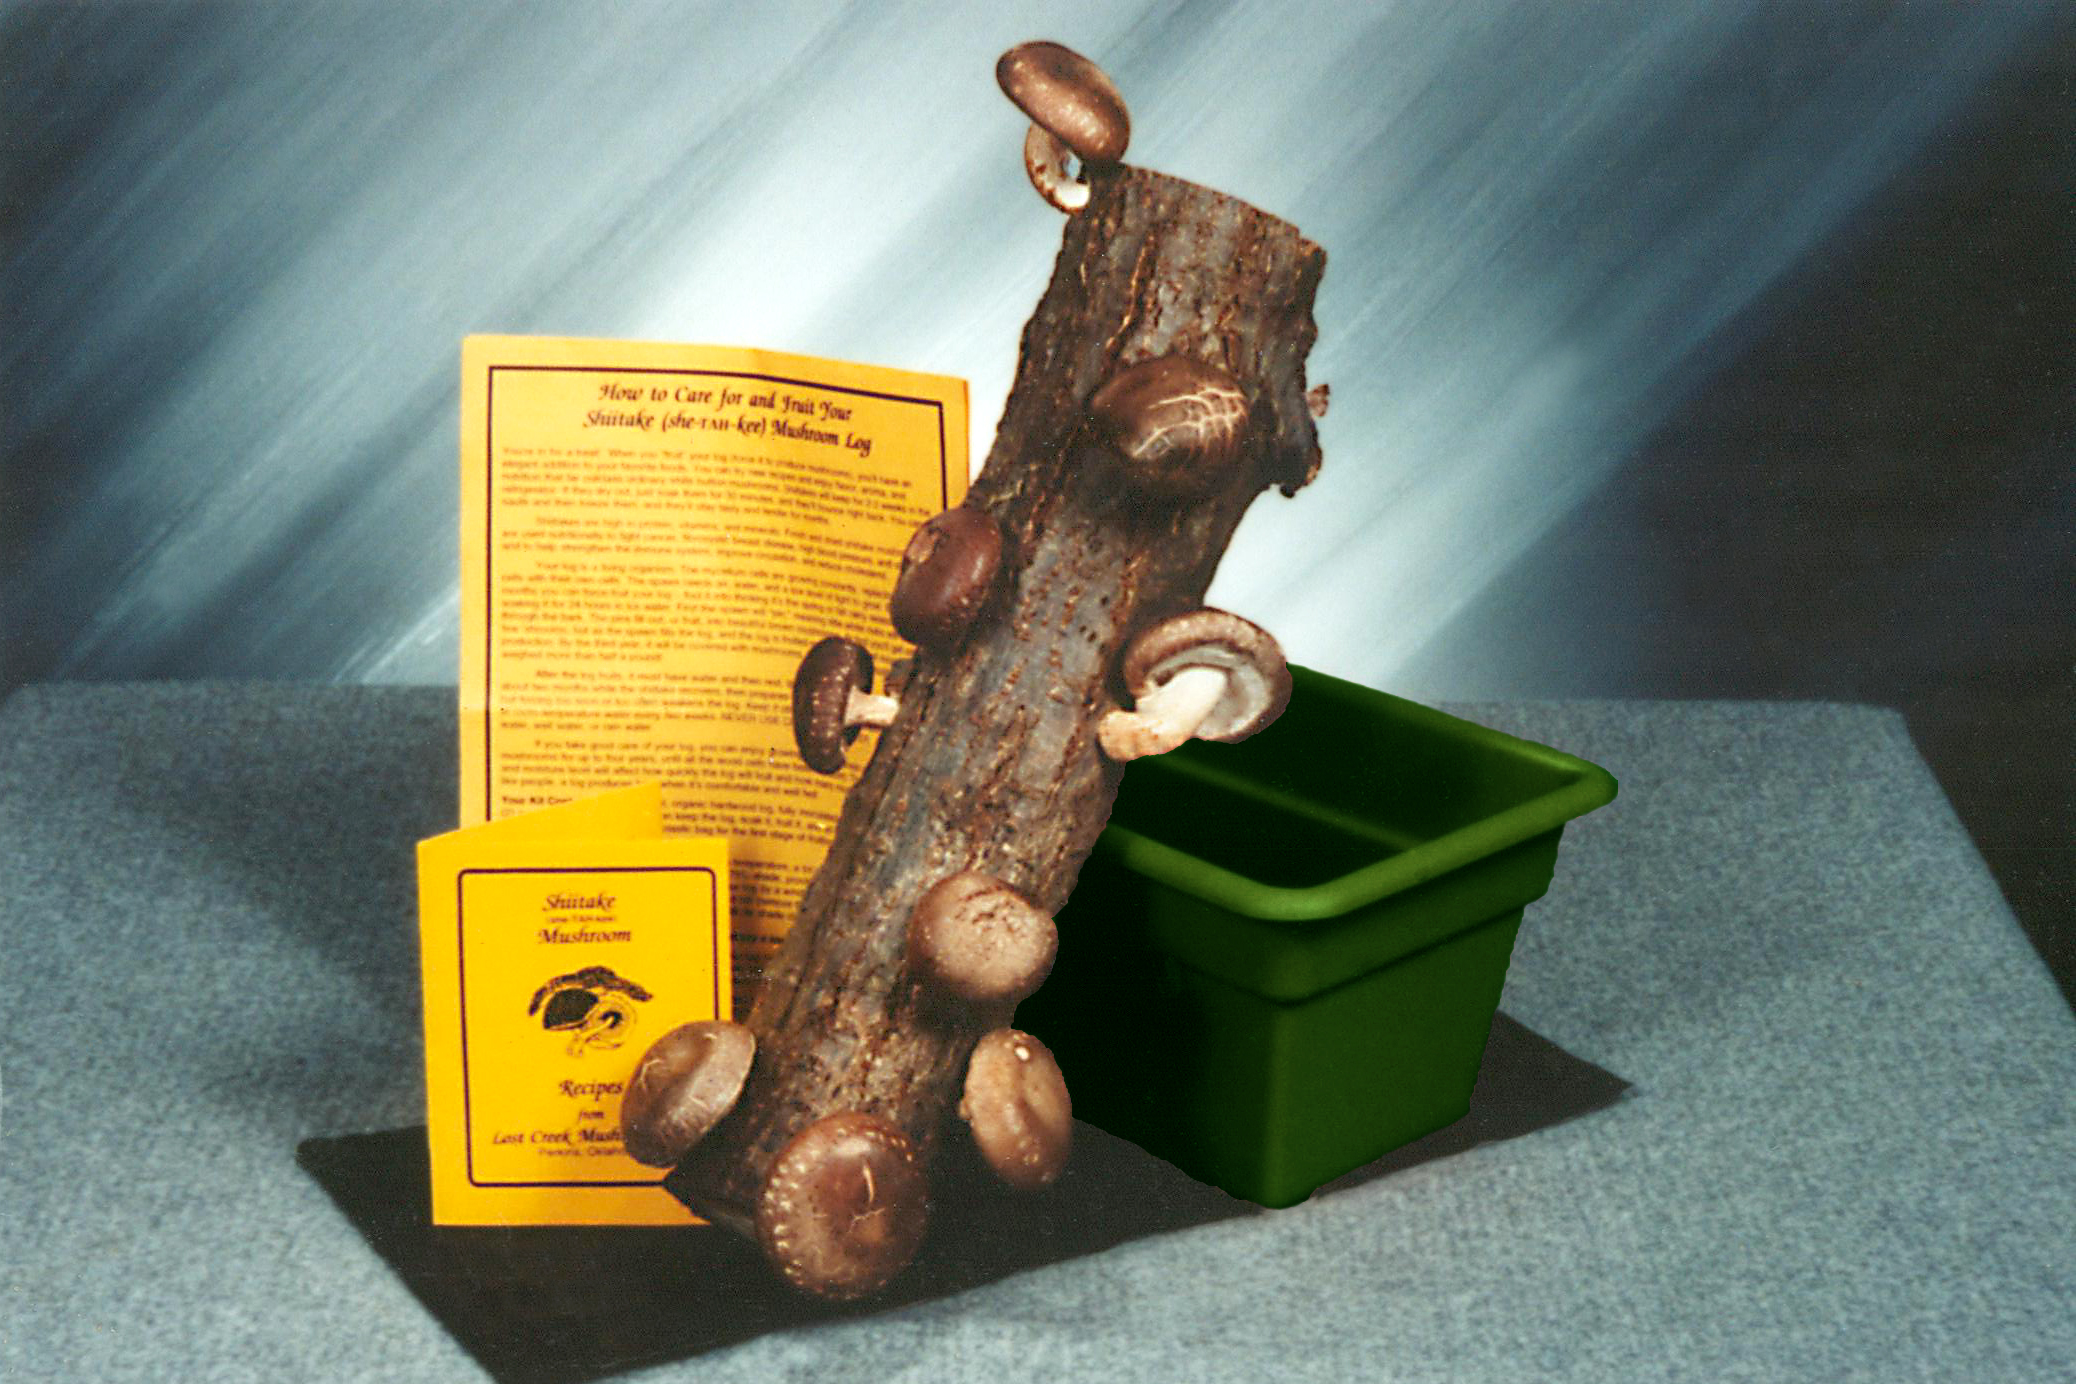 Original Shiitake Log Kit with a Tray for Soaking, Fruiting and Resting $49.95 or 2 for $90 shipped to the same address.